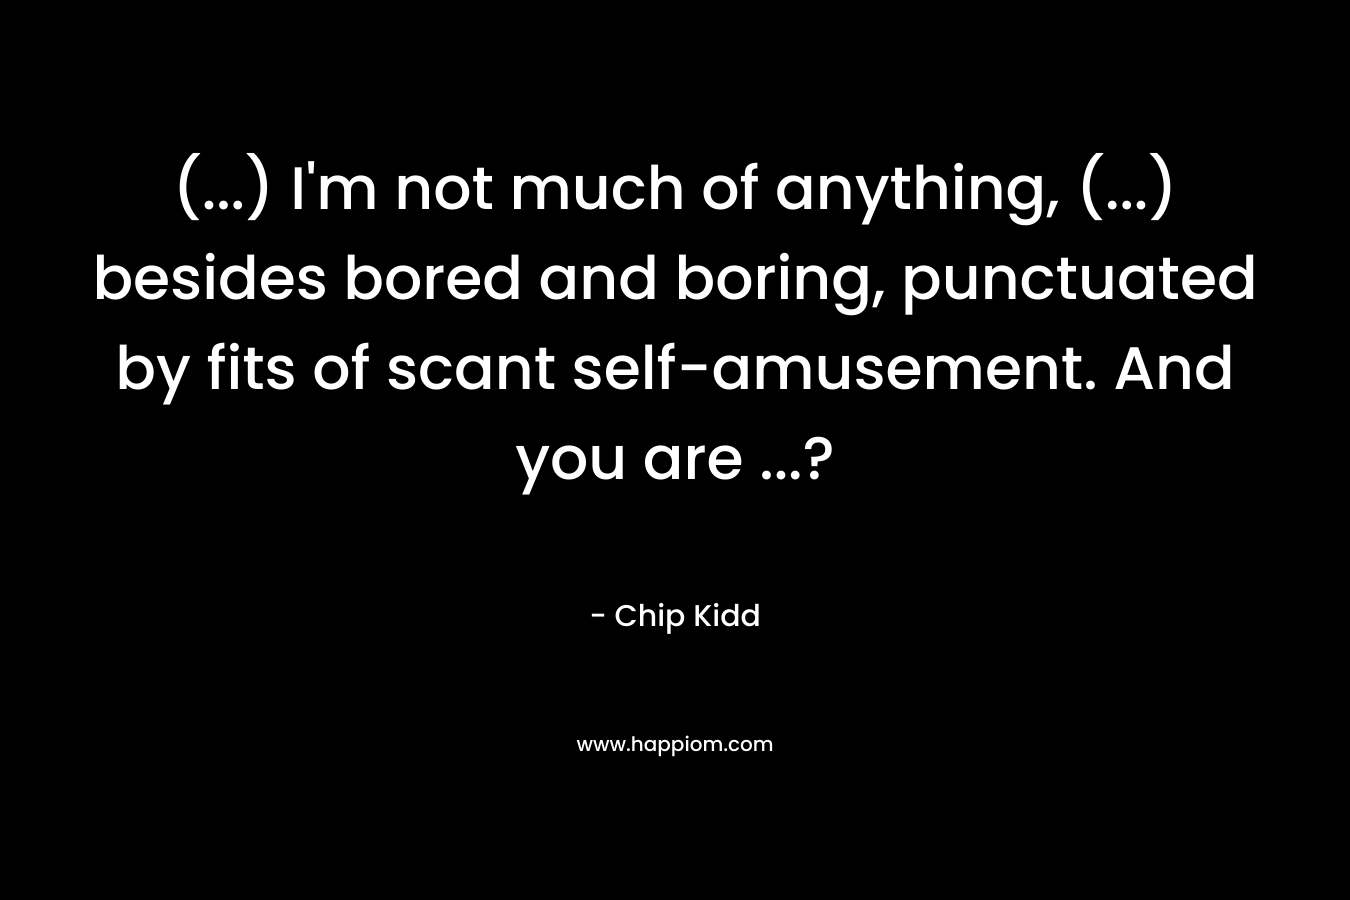 (...) I'm not much of anything, (...) besides bored and boring, punctuated by fits of scant self-amusement. And you are ...?